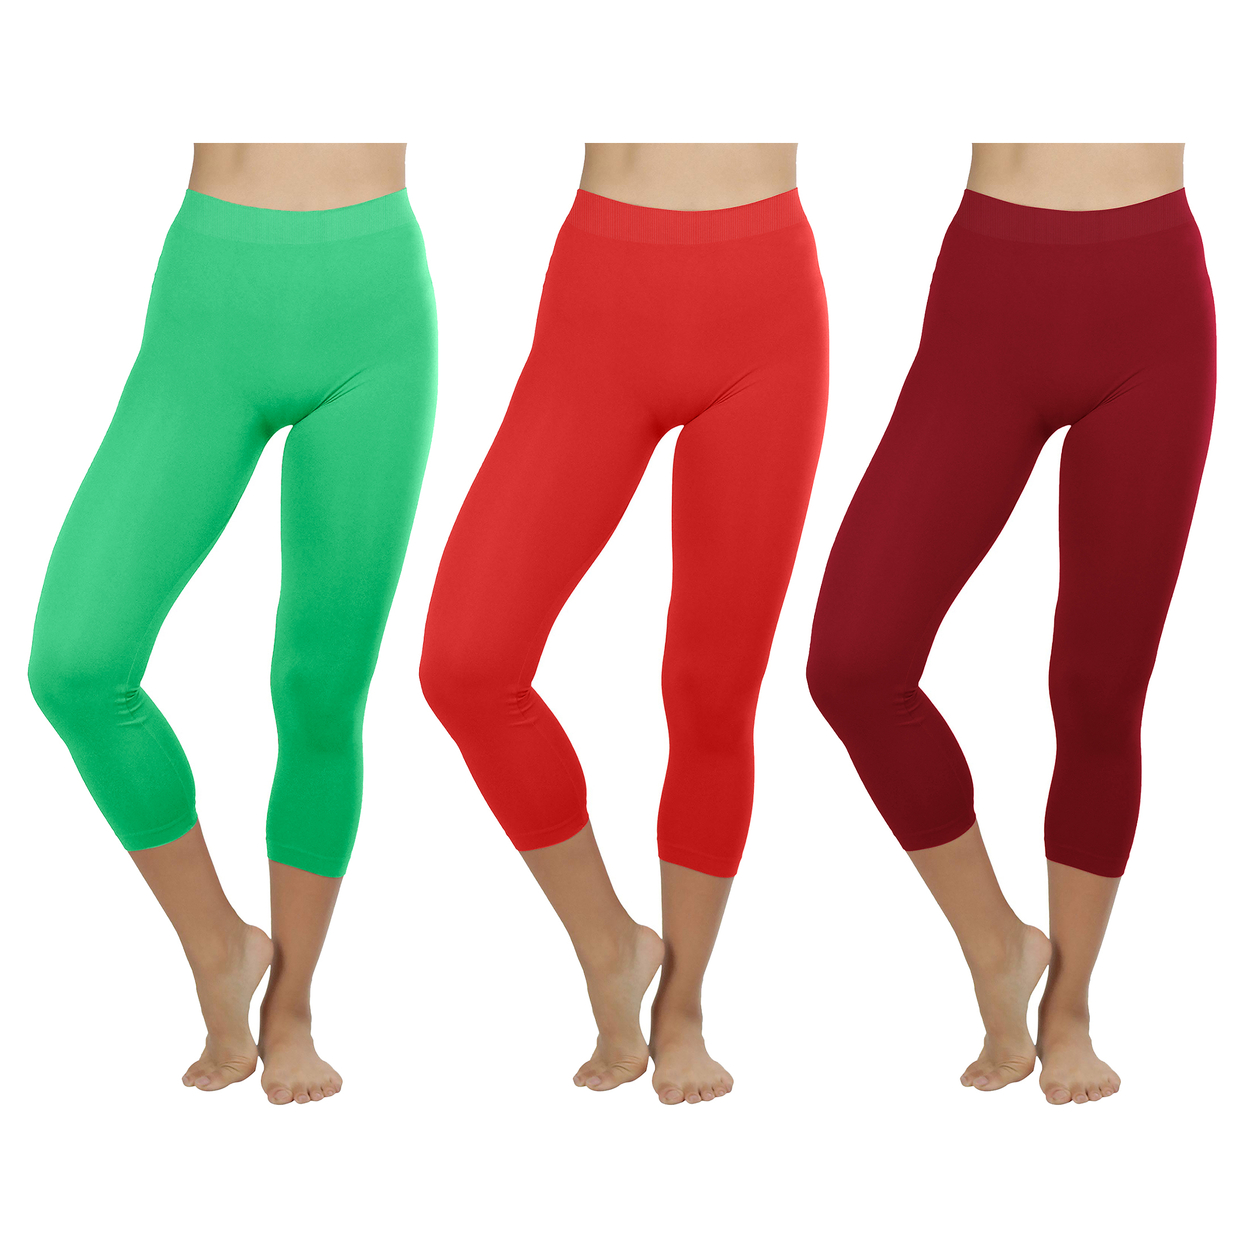 2-Pack: Women's Ultra-Soft High Waisted Smooth Stretch Active Yoga Capri Leggings - Red & Red, X-large